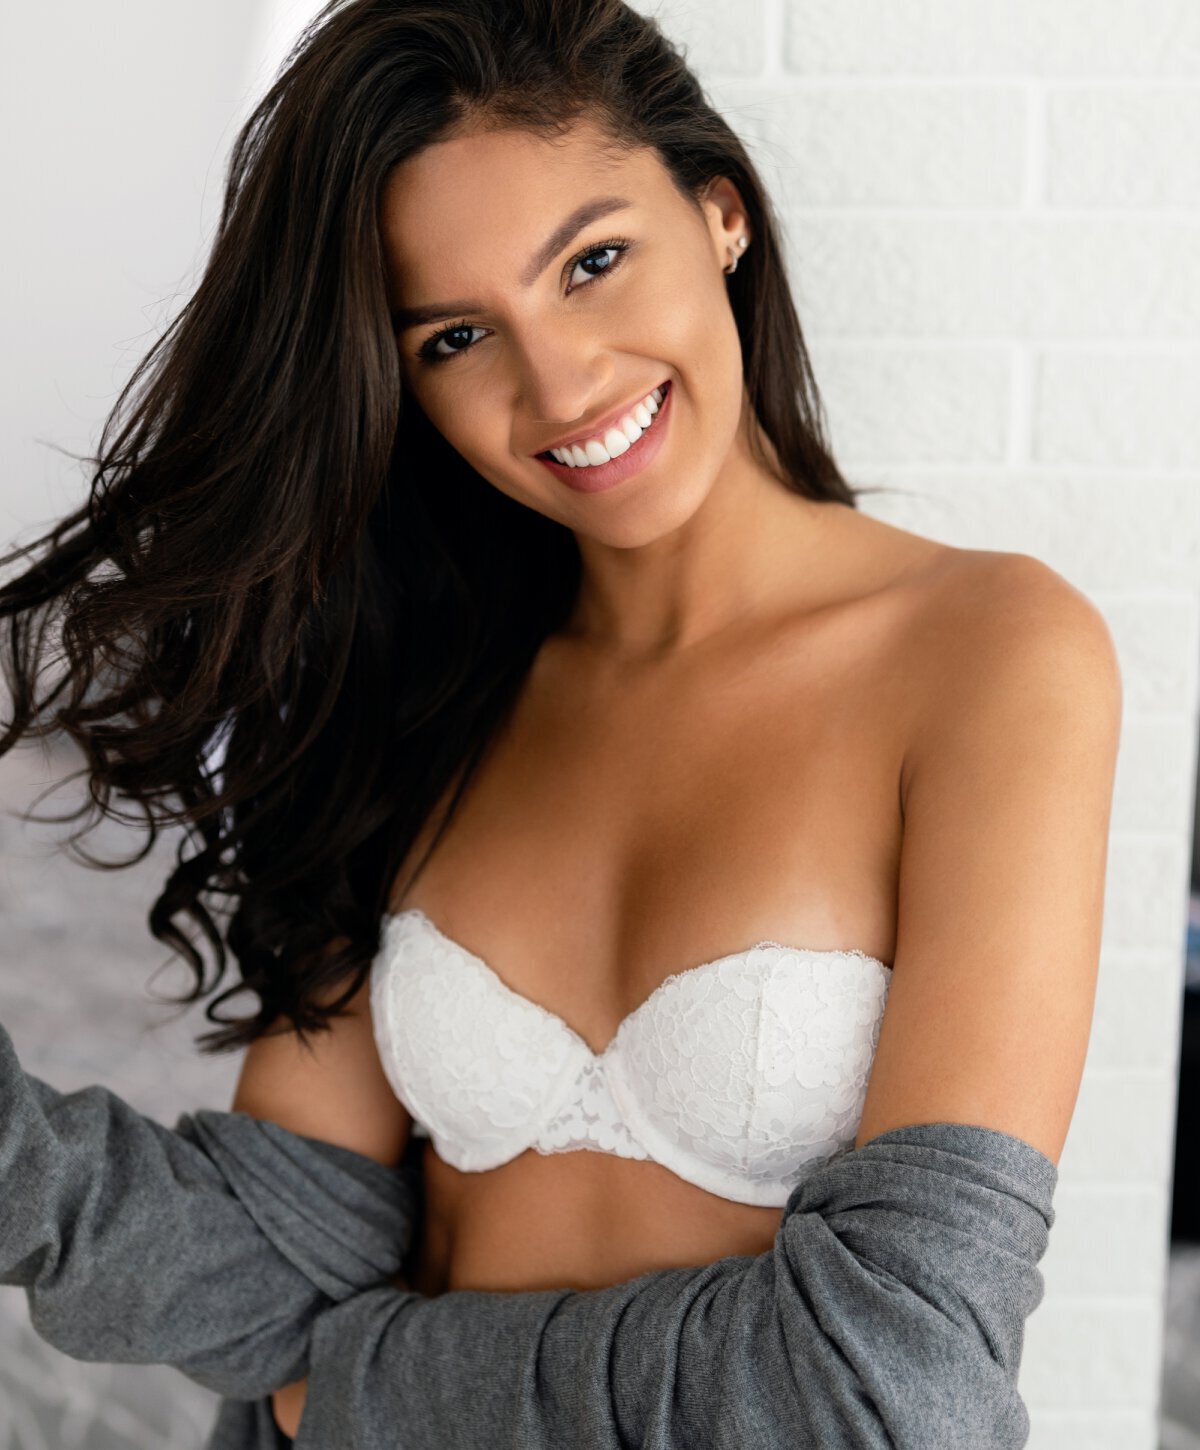 Austin breast revision model with black hair